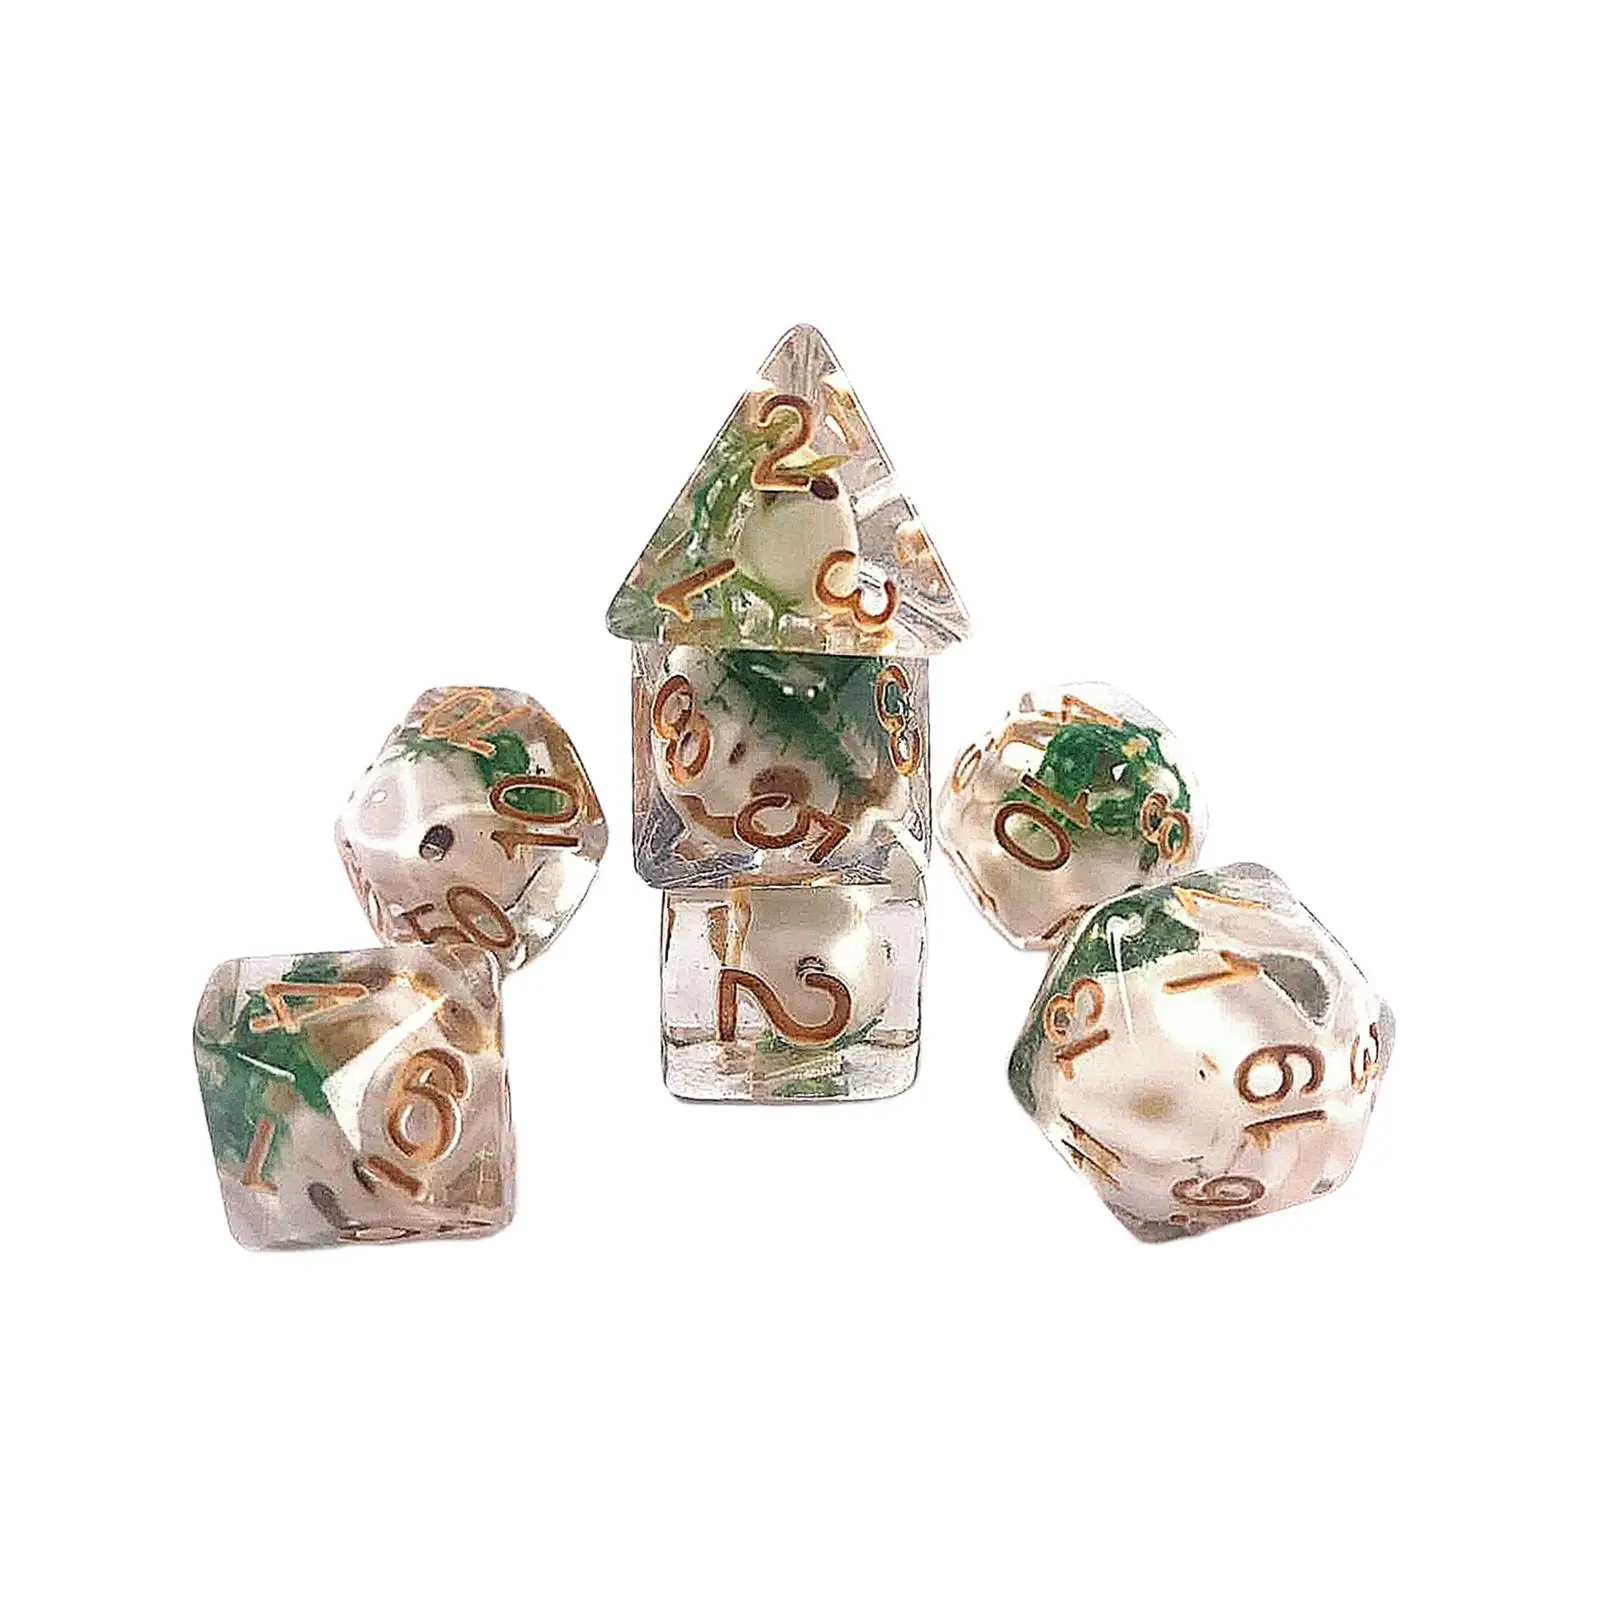 7 Pieces Multi Sided Polyhedral Dice D6 D4 D8 D10 D12 D20 Props for Family Gathering Role Playing Bar Tabletop Game